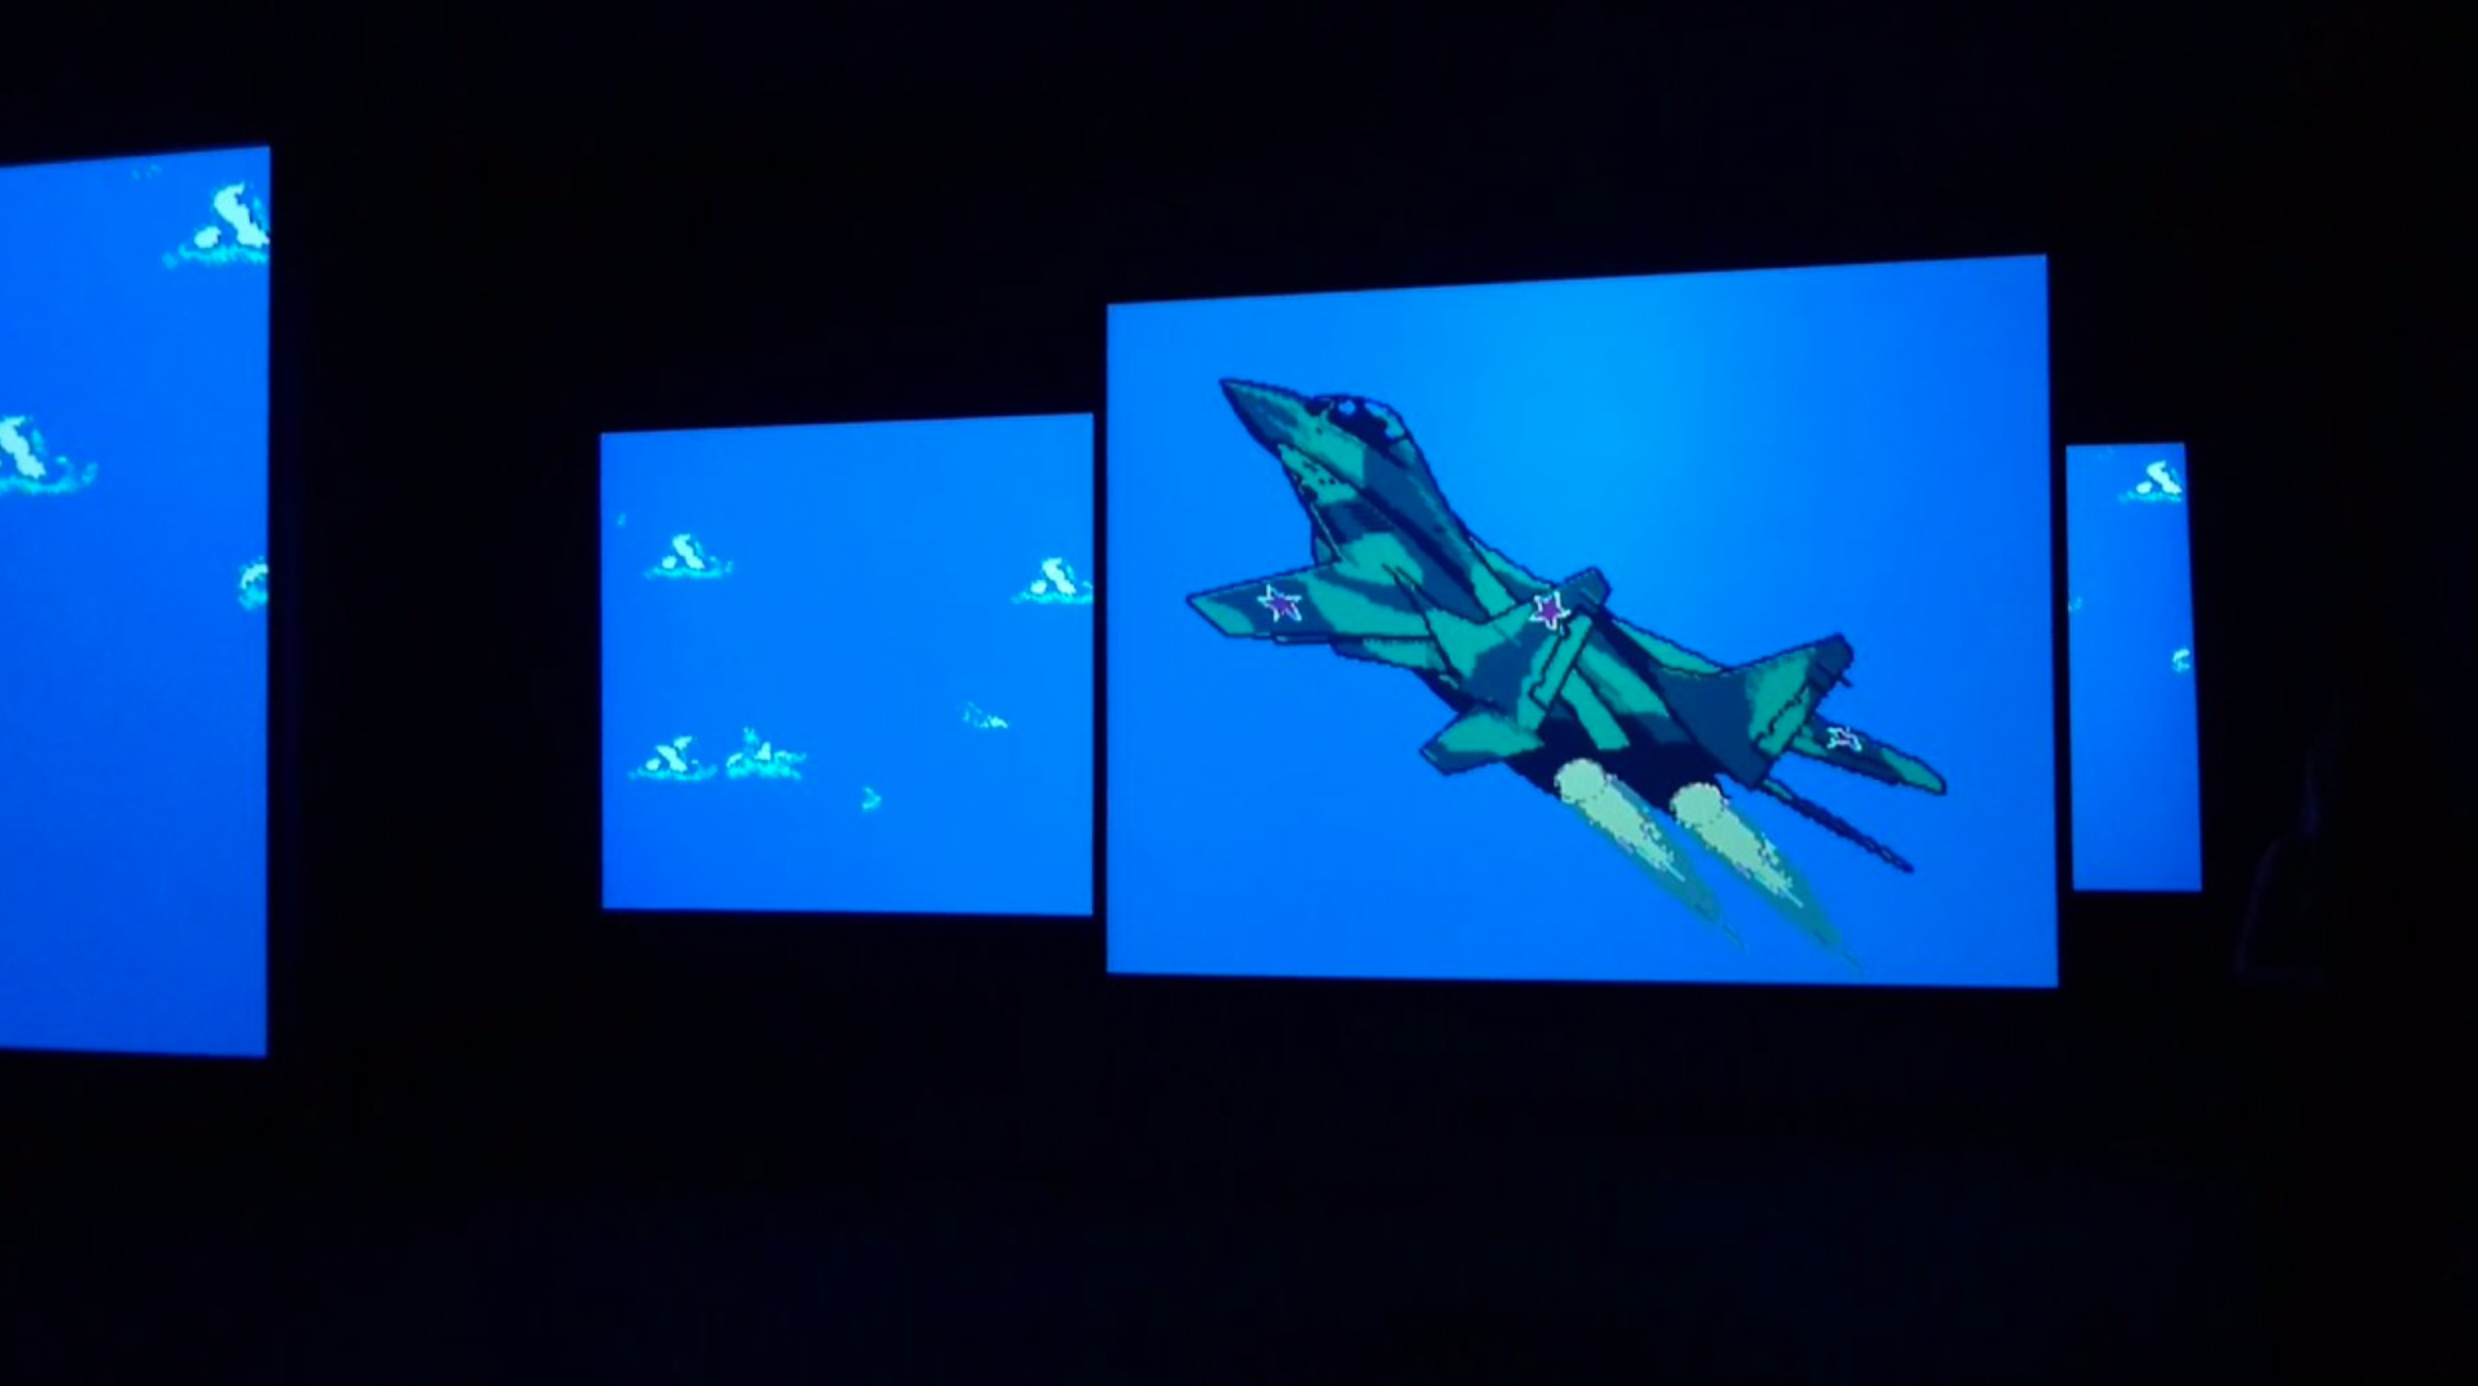   MIG 29 Soviet Fighter Plane and Clouds  (Cory Arcangel, 2015) 